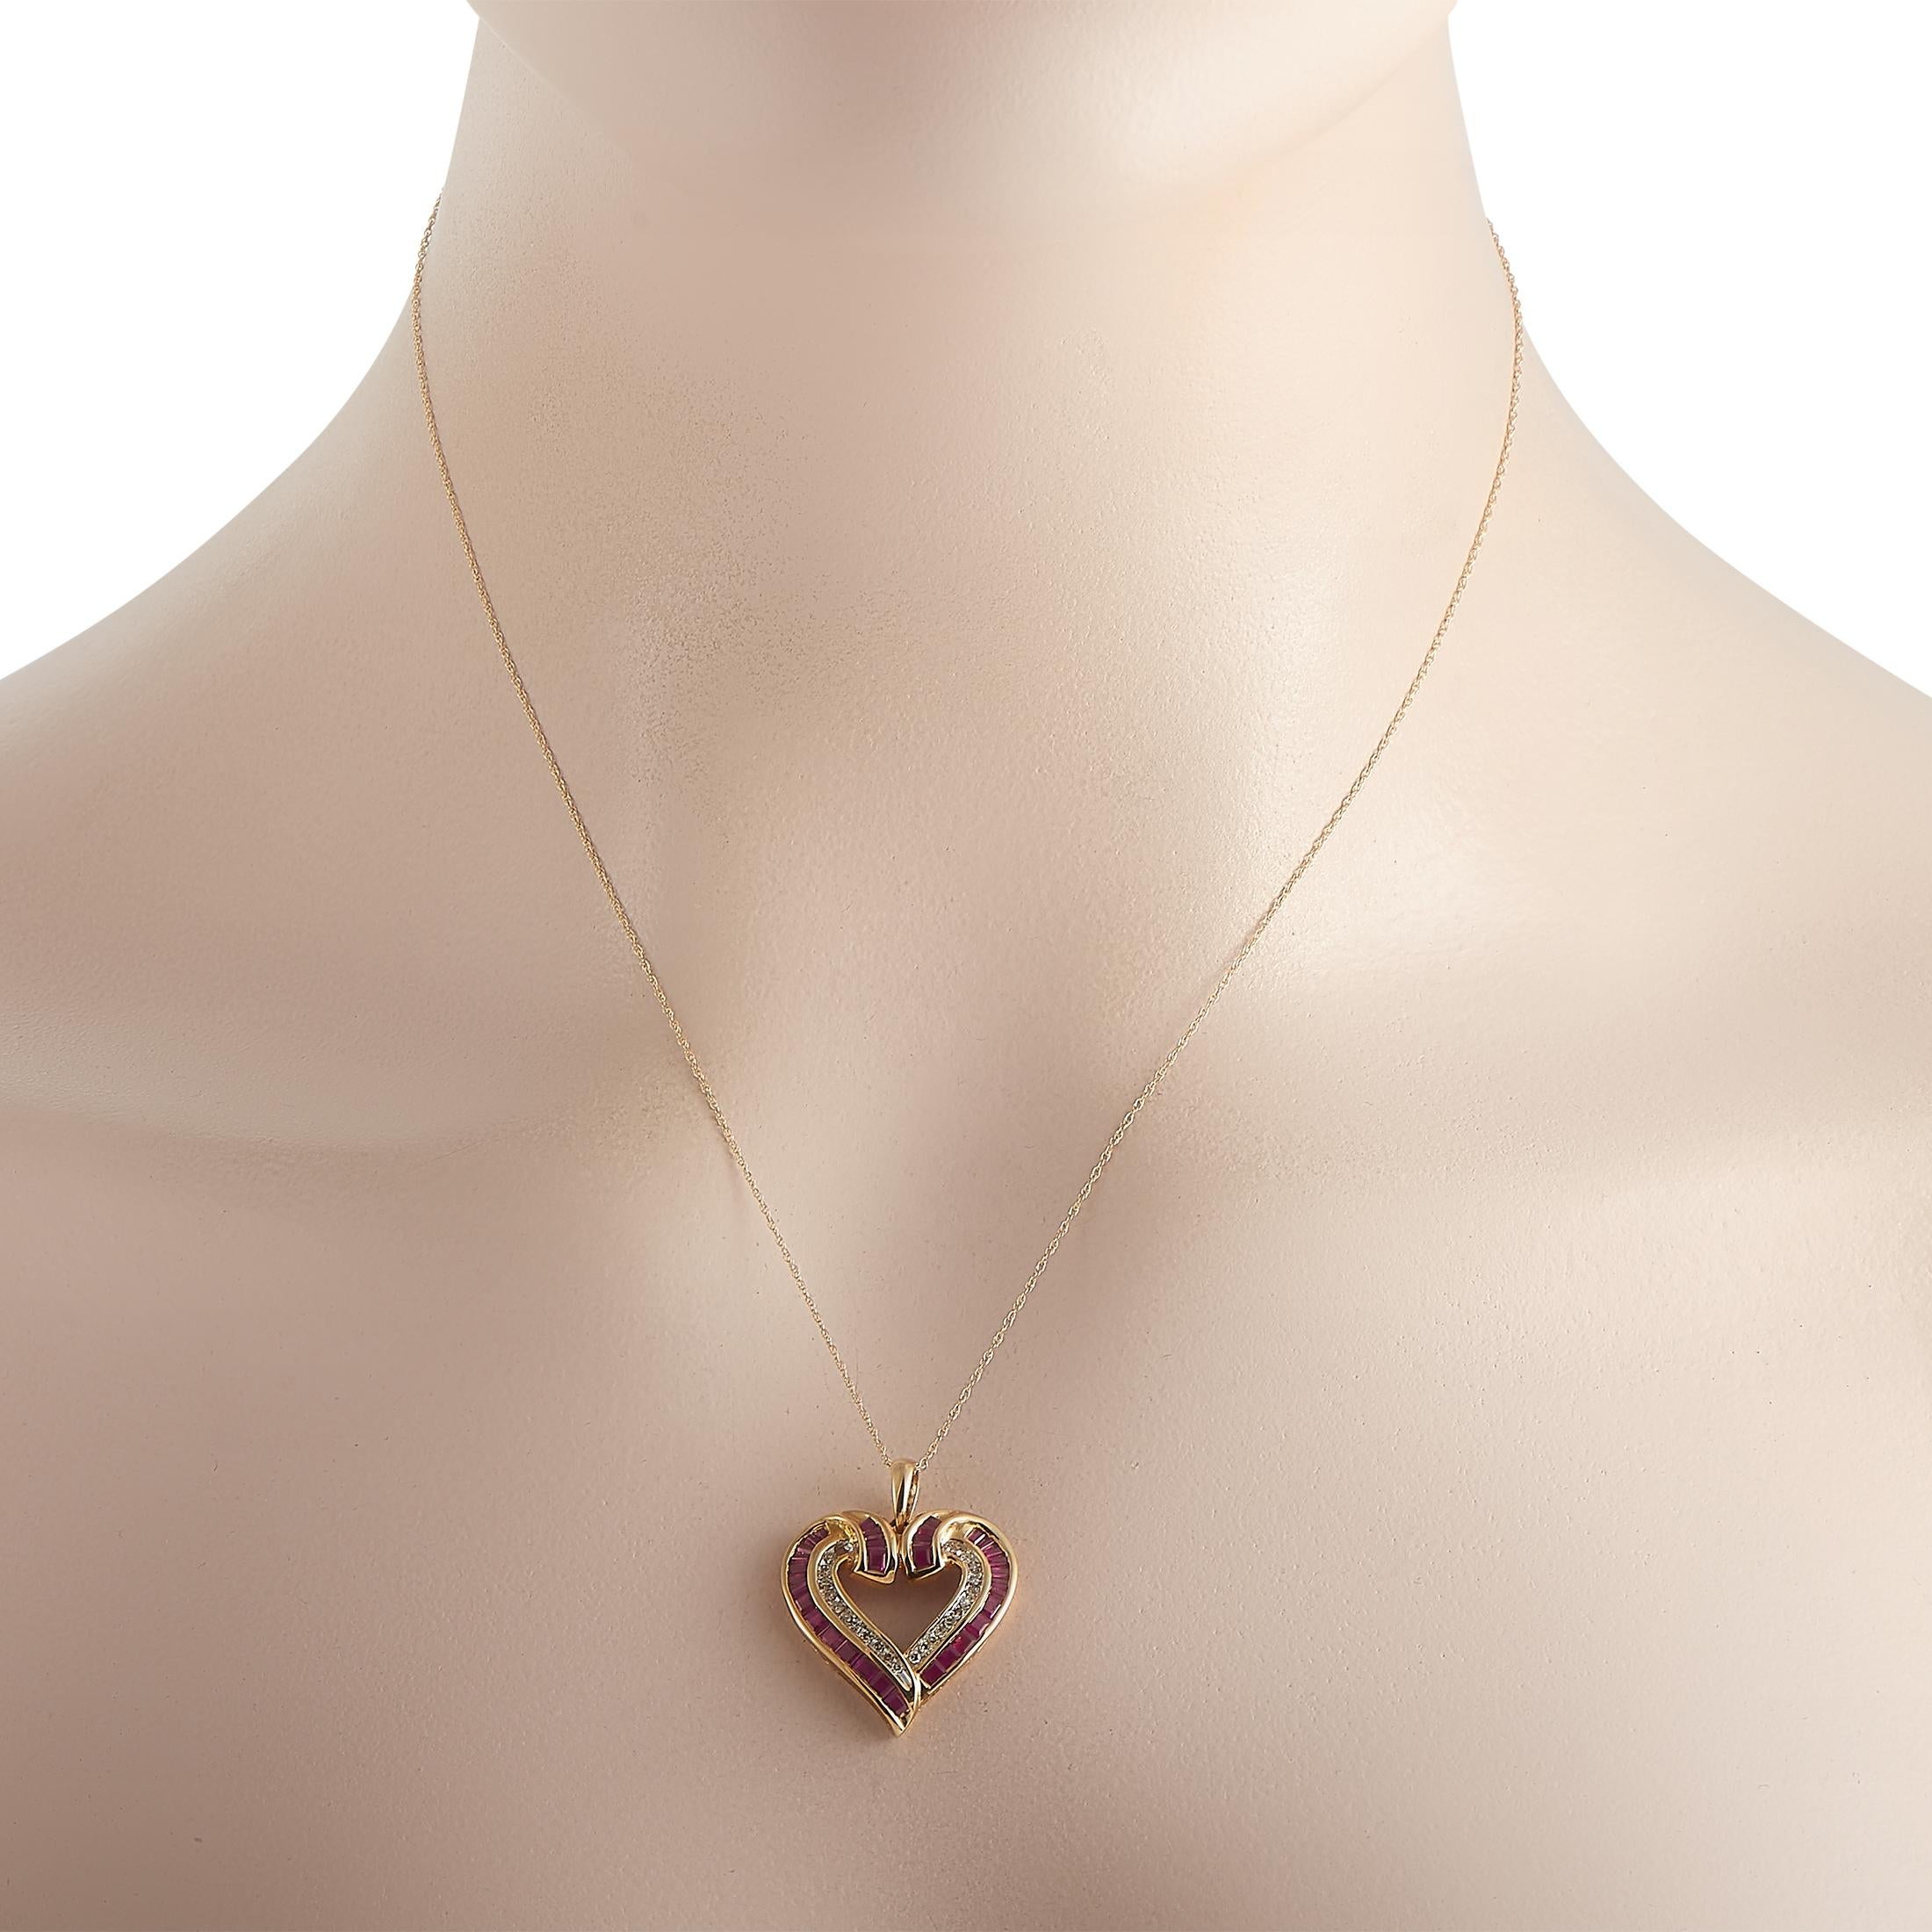 This pretty LB Exclusive 14K Yellow Gold 0.16 ct Diamond Ruby Heart Pendant Necklace is made with a 14K yellow gold chain, highlighting the beautiful 14K yellow gold open heart-shaped pendant which is set with a 0.20-carat row of round diamonds and